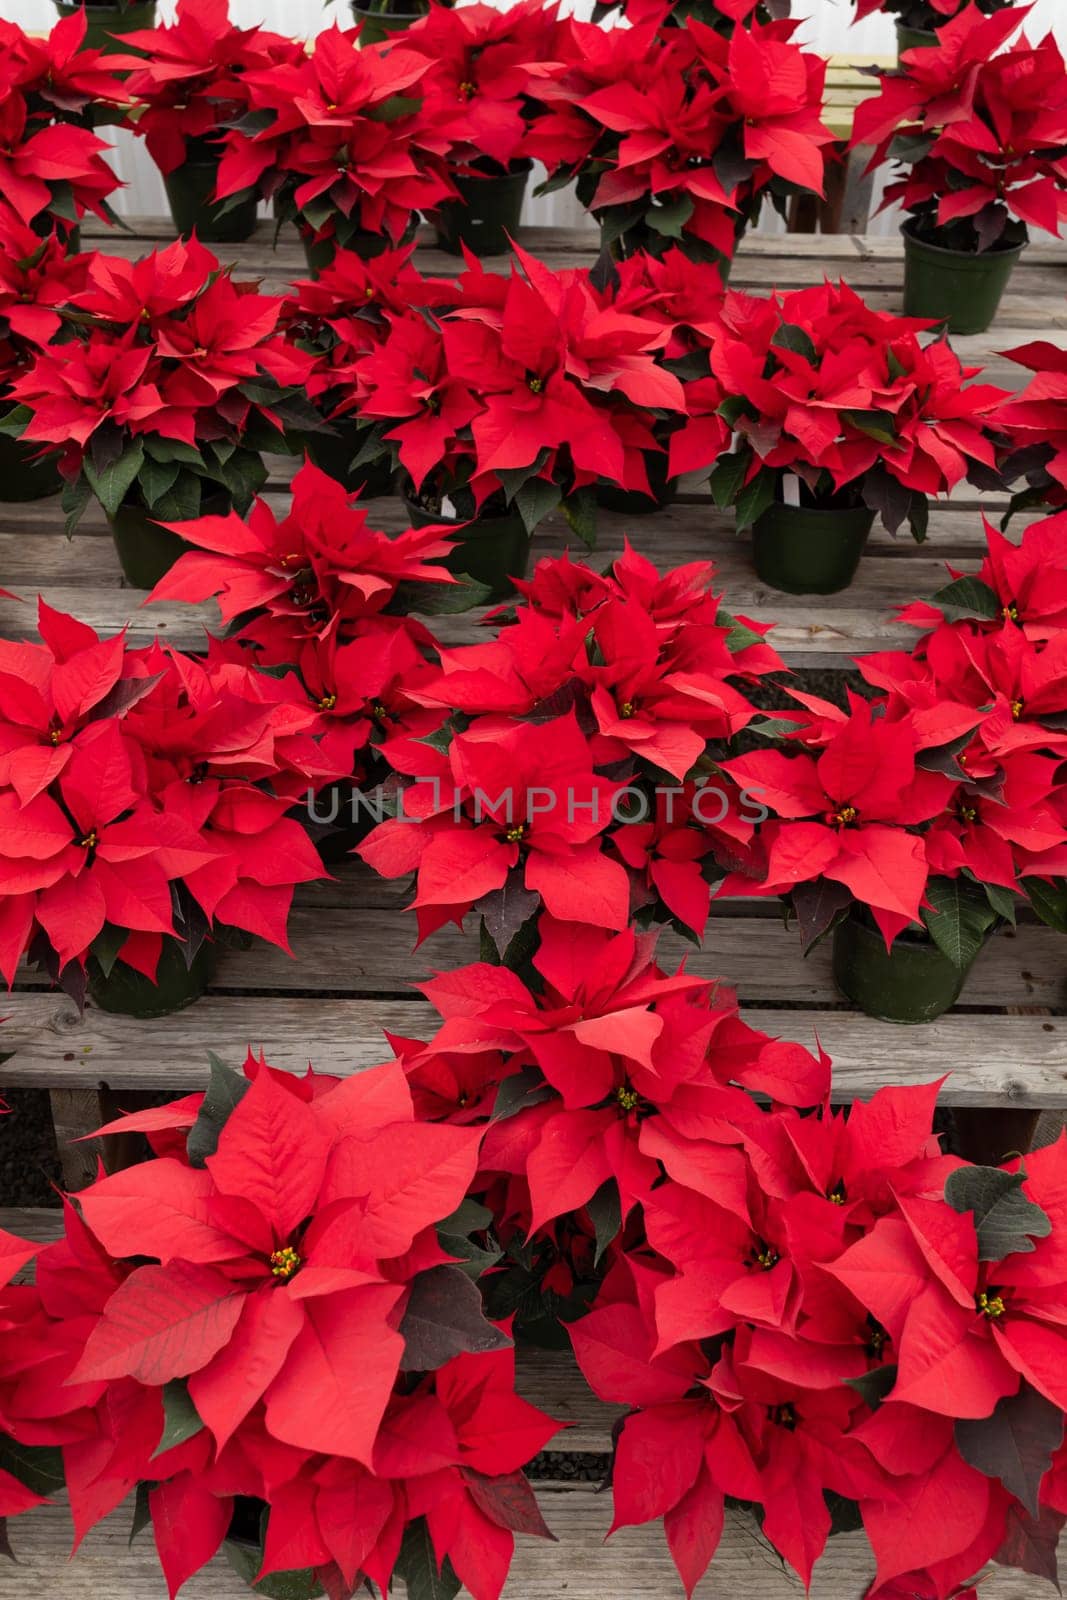 ManyRed Striking Poinsettia Flower, With Star-shaped Red Leaves, Christmas Eve Flower, Flor De Nochebuena. Tropical Shrub. Vertical Backdrop. National Poinsettia Day Celebration